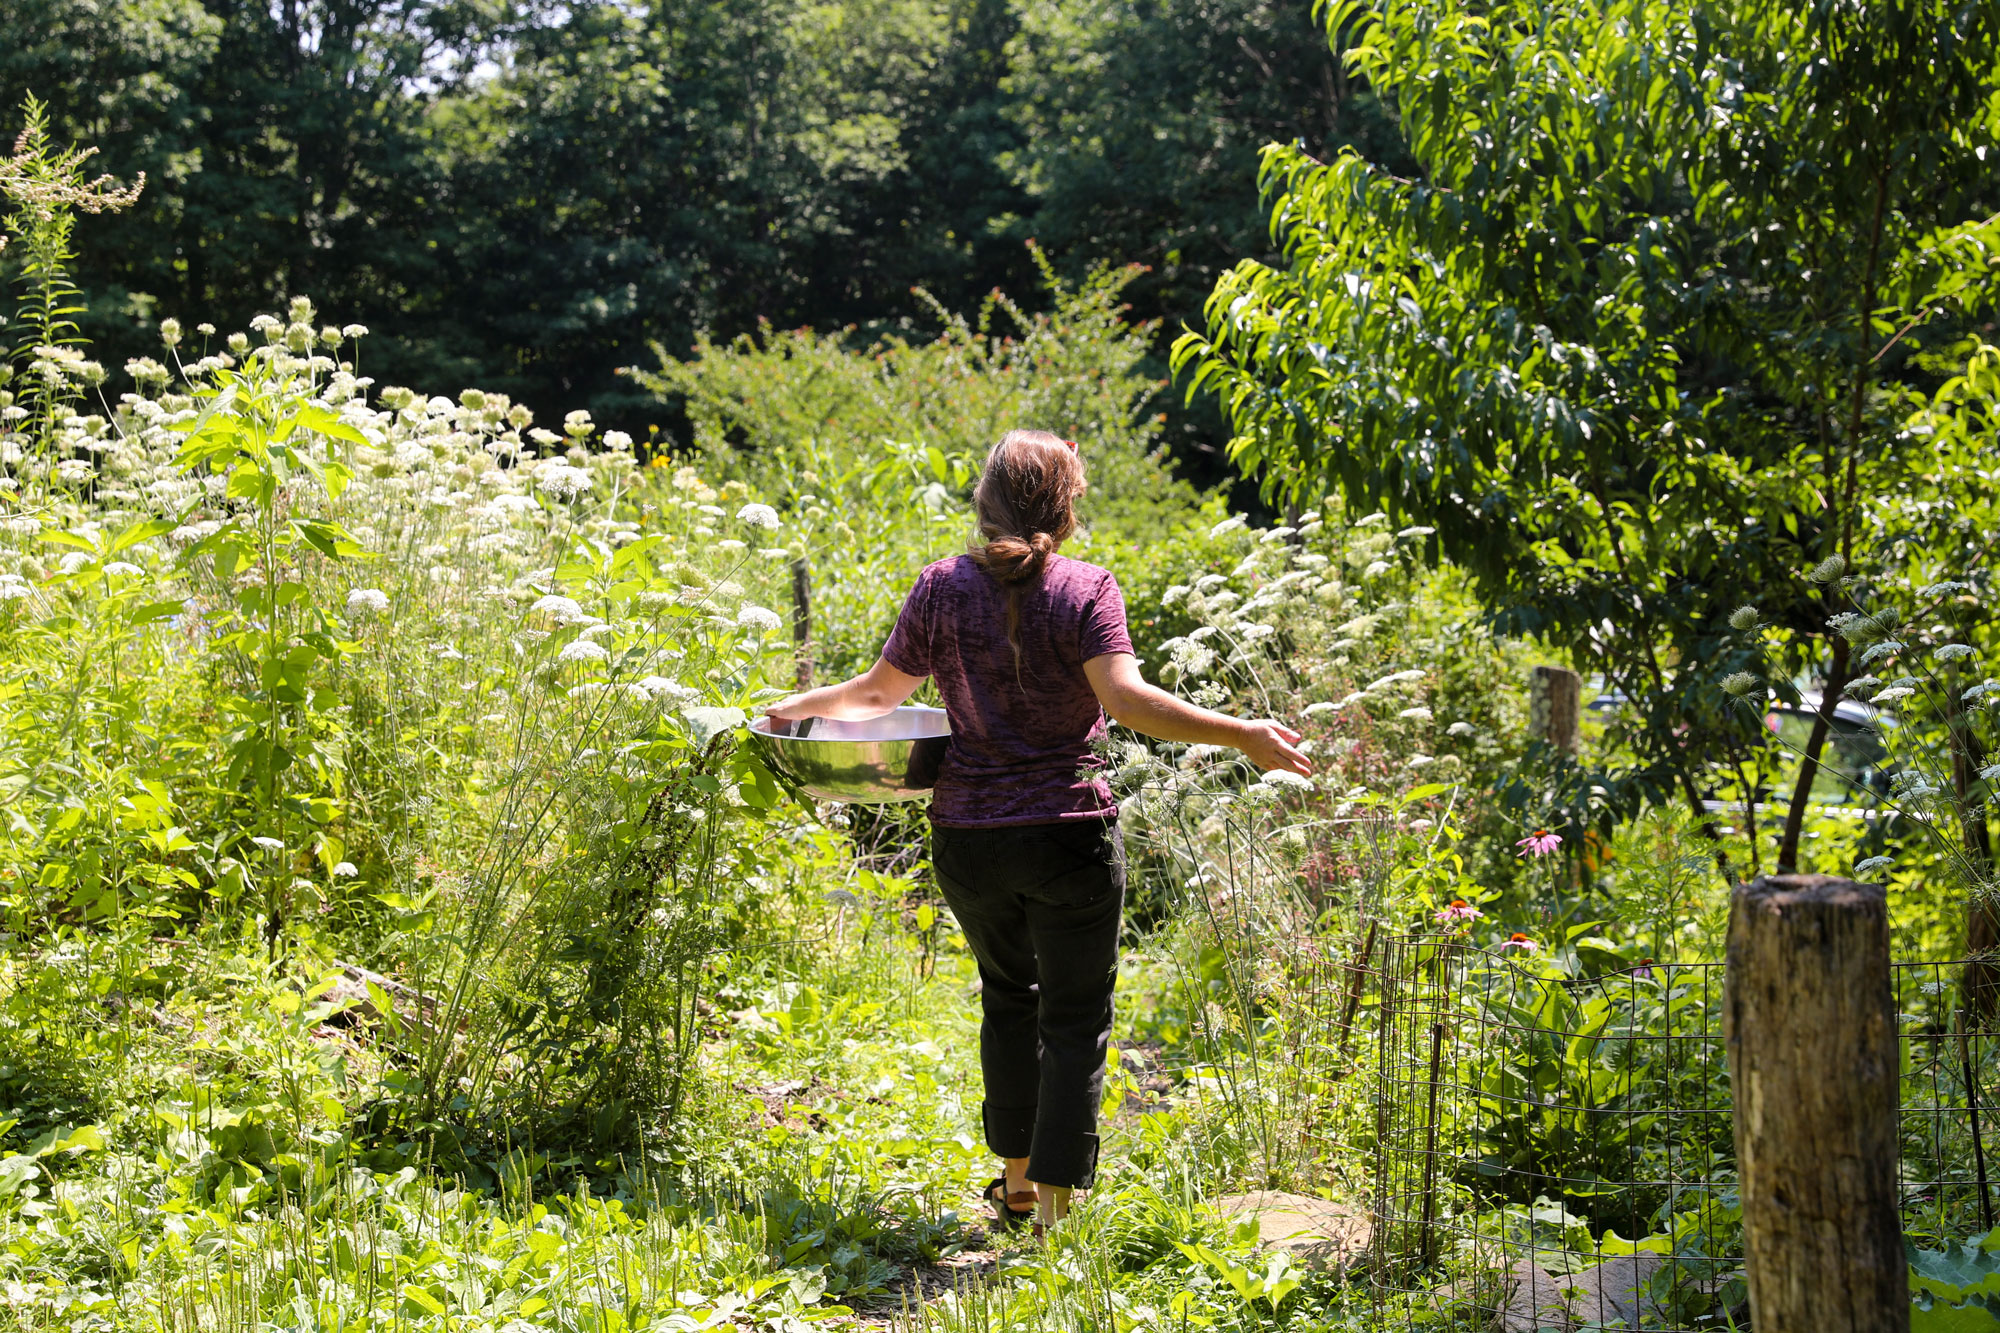 A woman holds a large bowl while passing her hands through a field of flowers